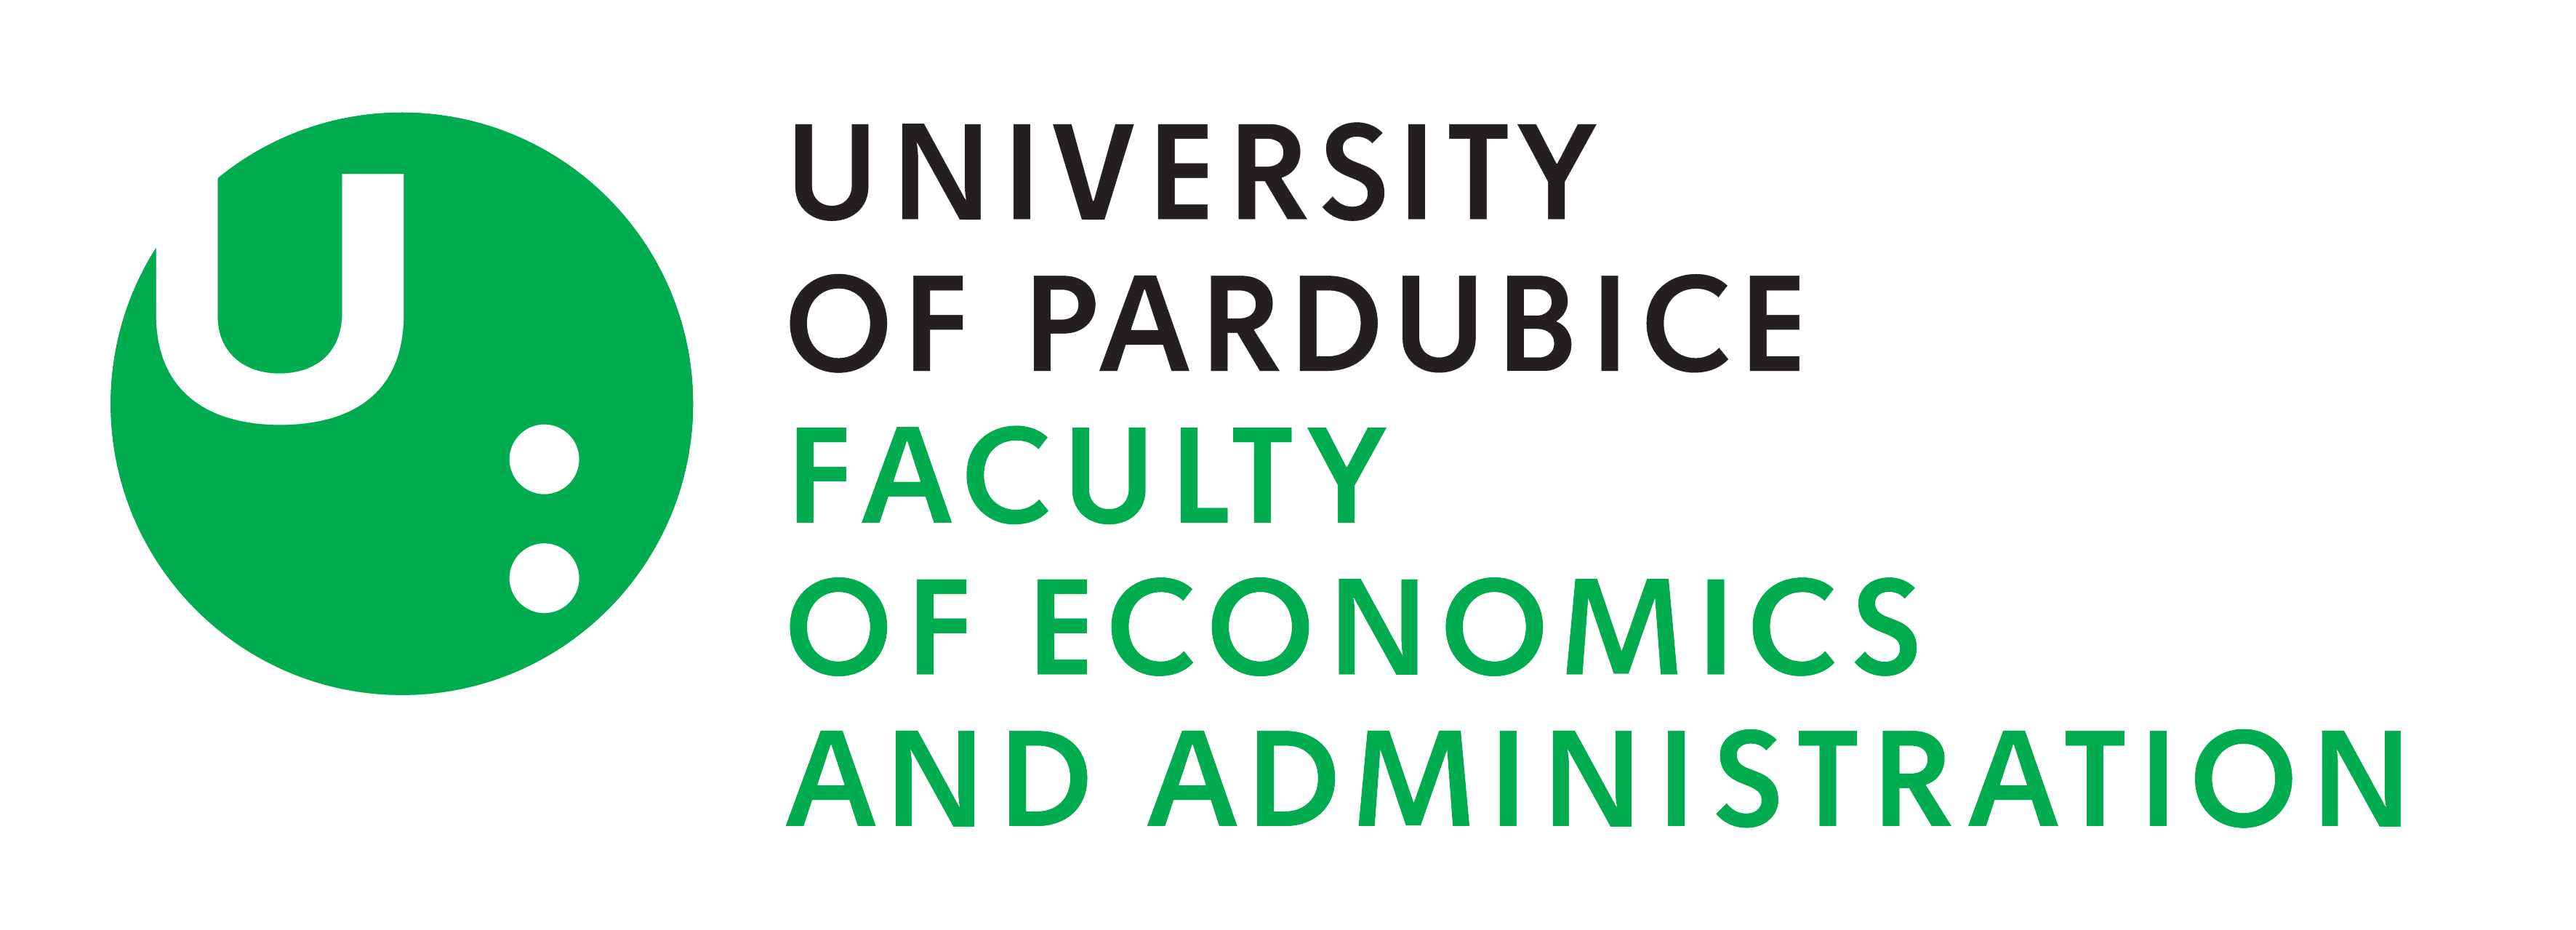 UNIVERSITY OF PARDUBICE FACULTY OF ECONOMICS AND ADMINISTRATION